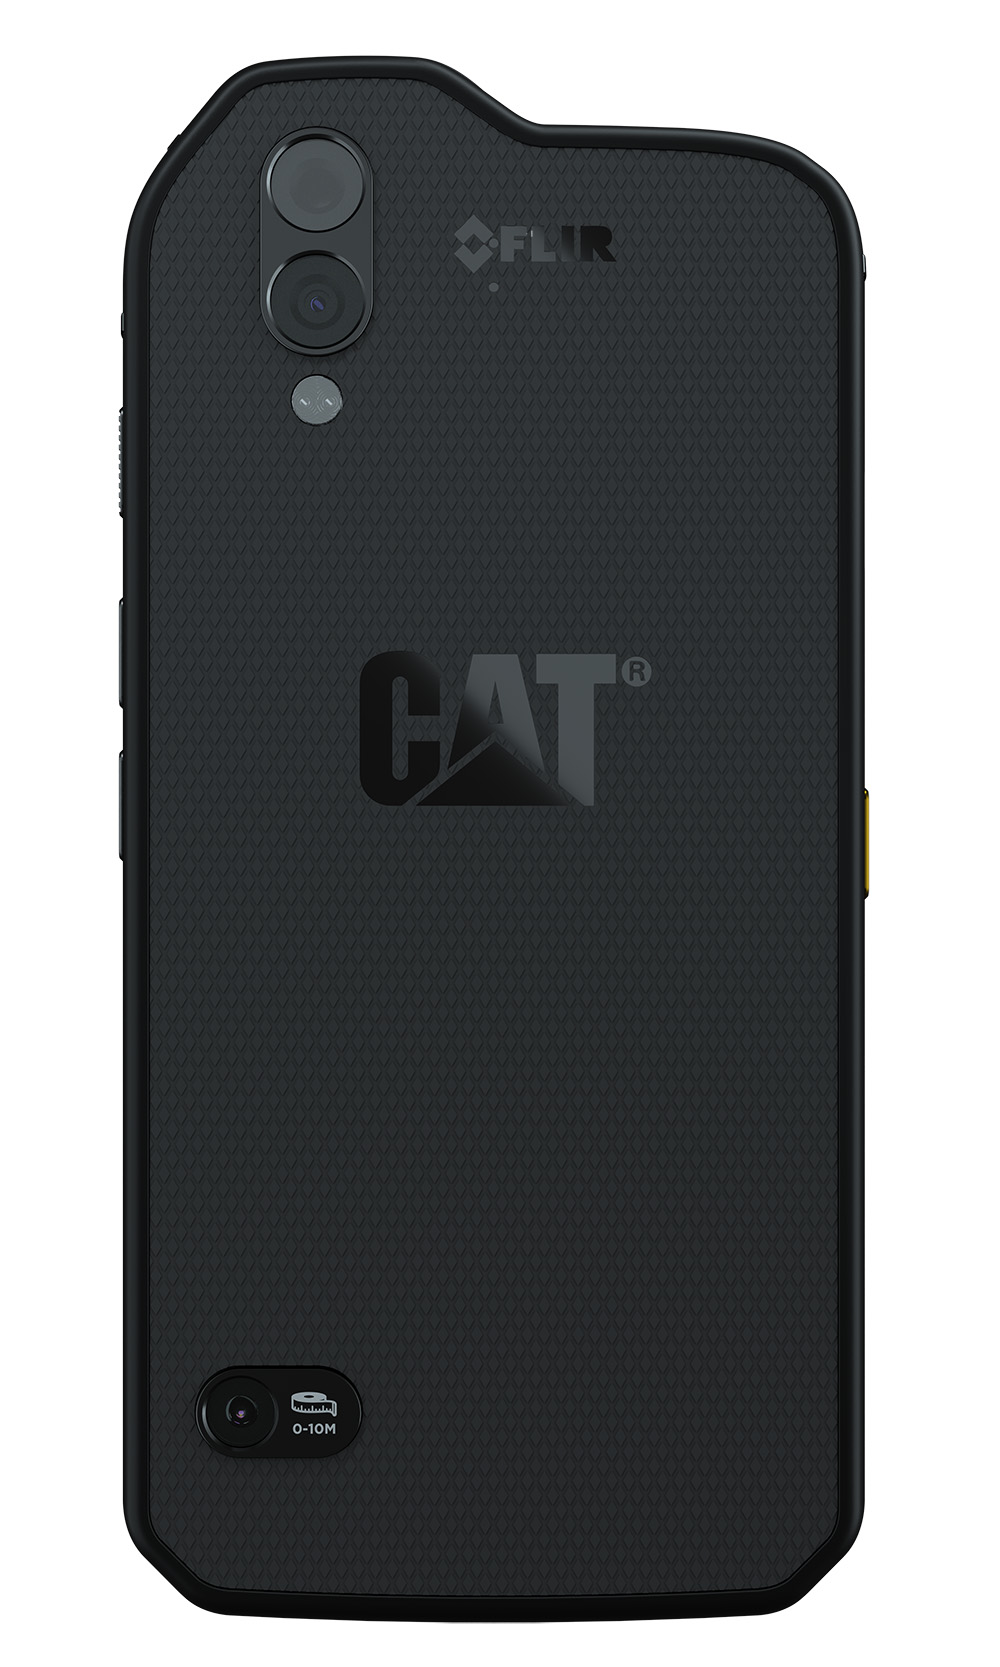 Introducing the Cat  S61 Packed with integrated tools of 